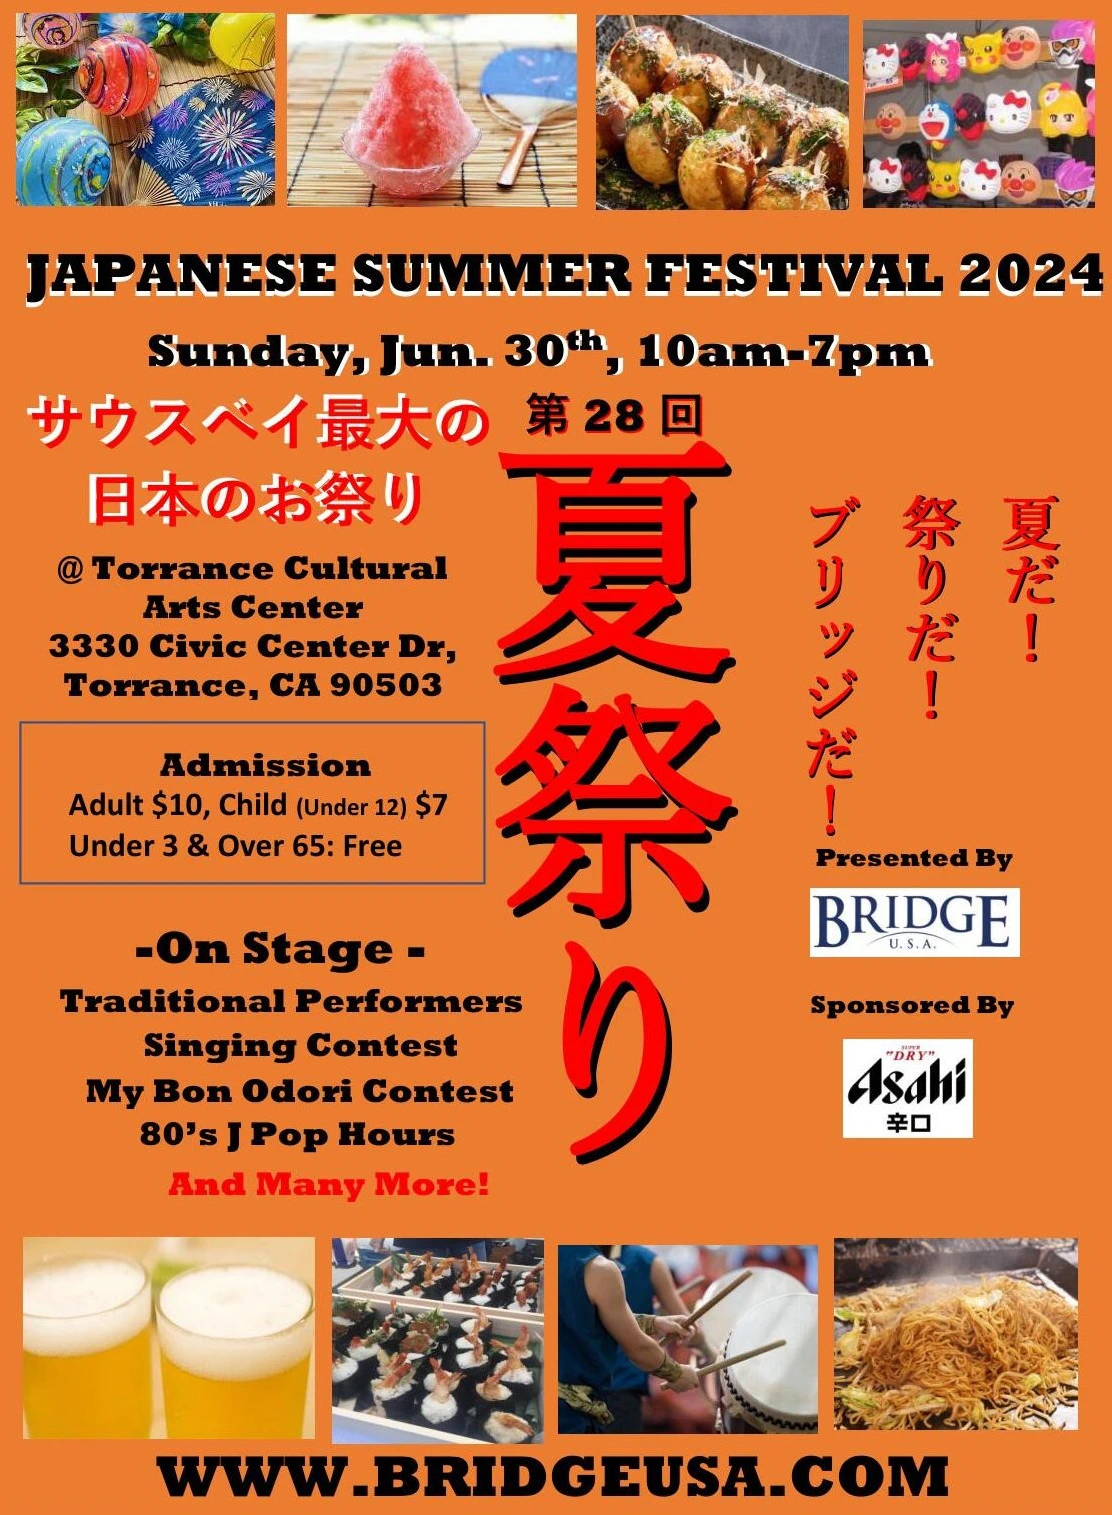 Coming! Authentic Japanese Food